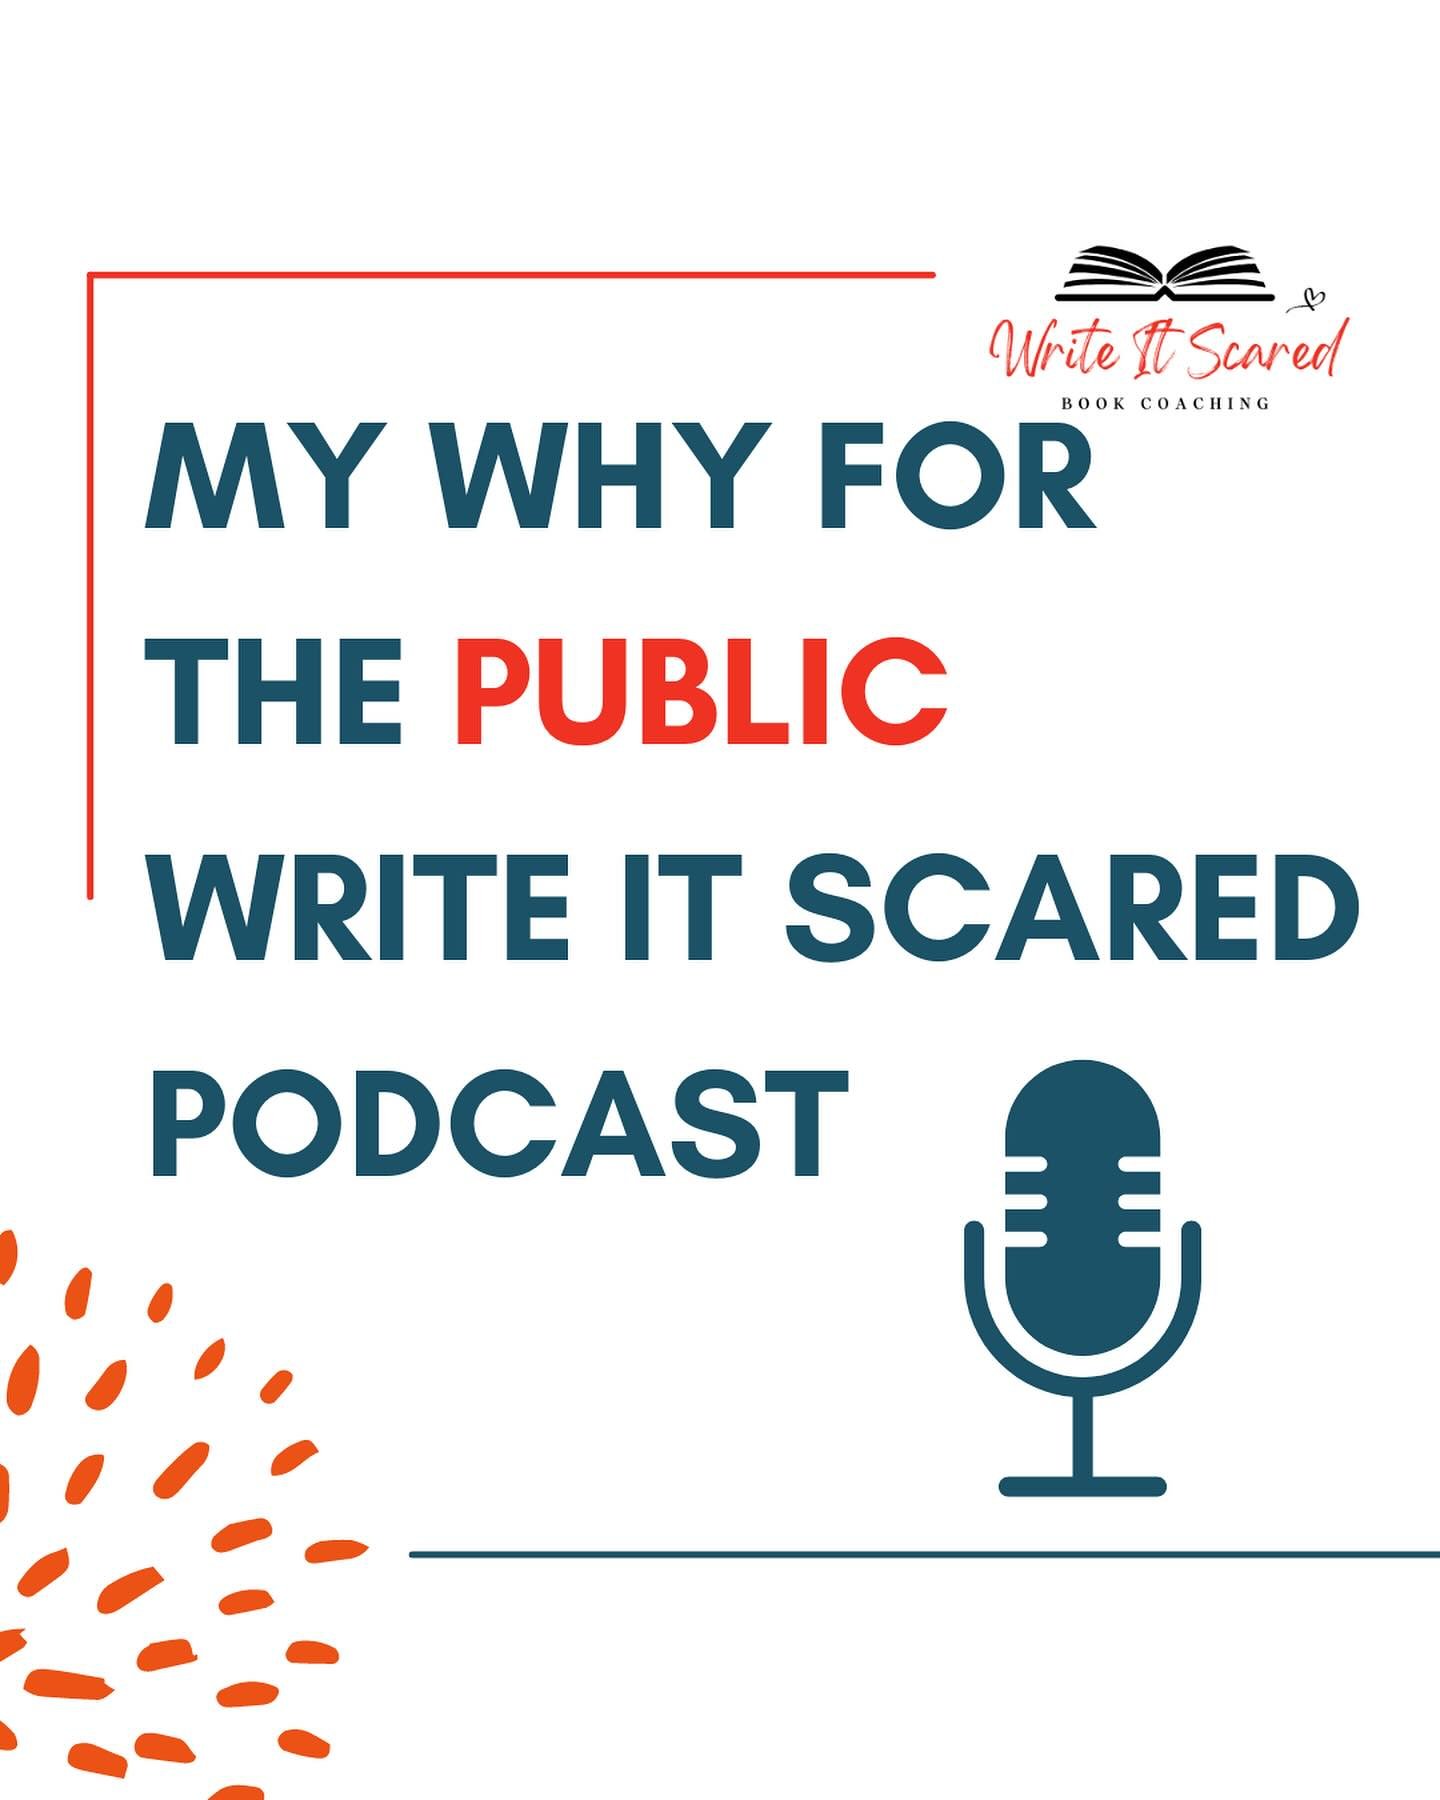 And just like that, here are the first 4 episodes of The Write It Scared Podcast!

The Mission: 

Tell the truth about why writing a novel is so hard by acknowledging that most writers grapple with two stories: the one they want to put on the page to